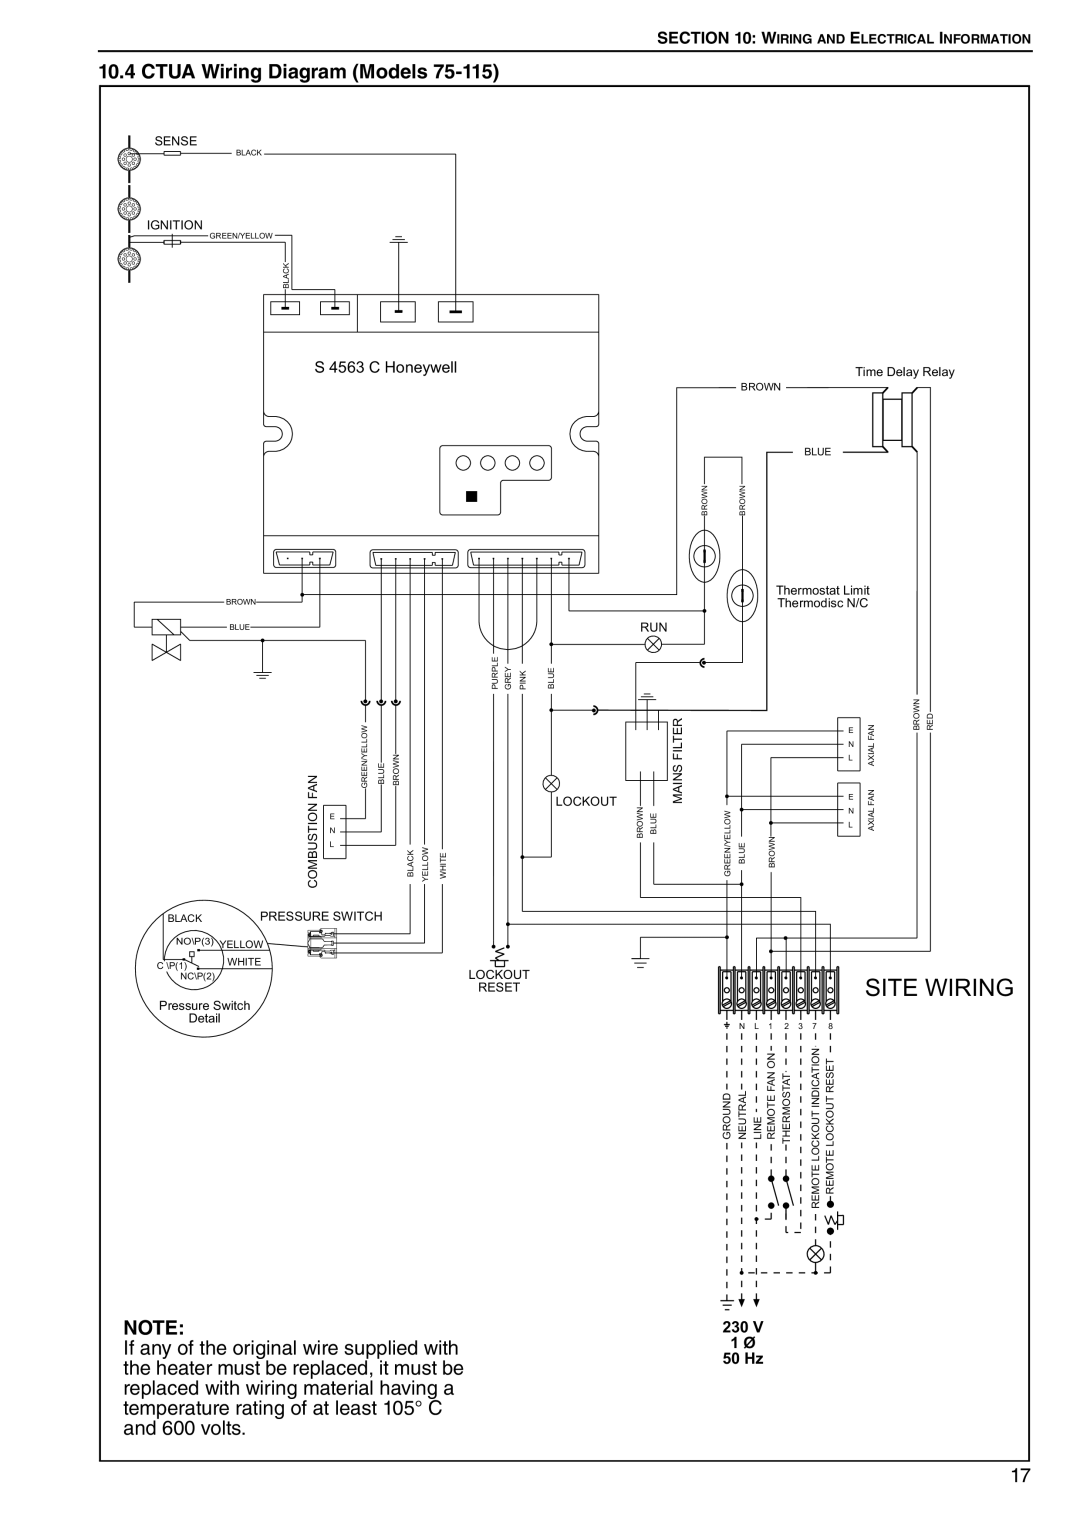 Roberts Gorden CTU 22 TO 115 service manual Site Wiring, CTUA Wiring Diagram Models, Wiring And Electrical Information 